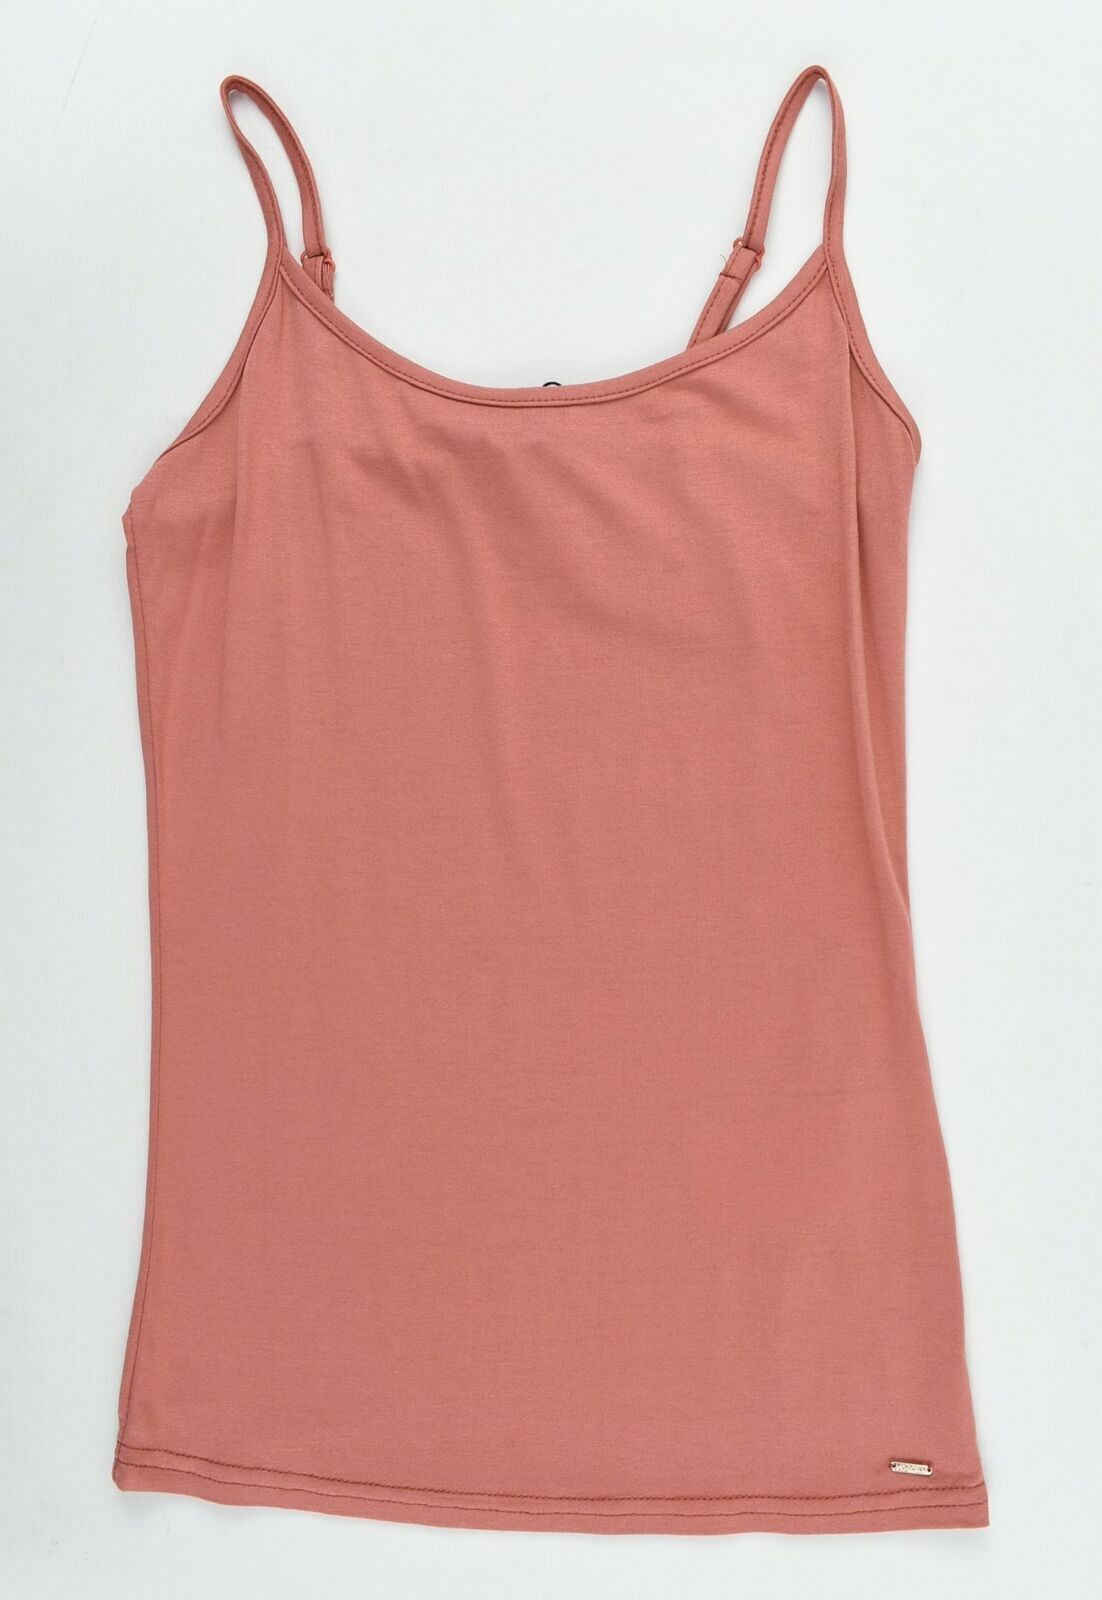 MORGAN Women's Red Strappy Vest Top- Size UK 6